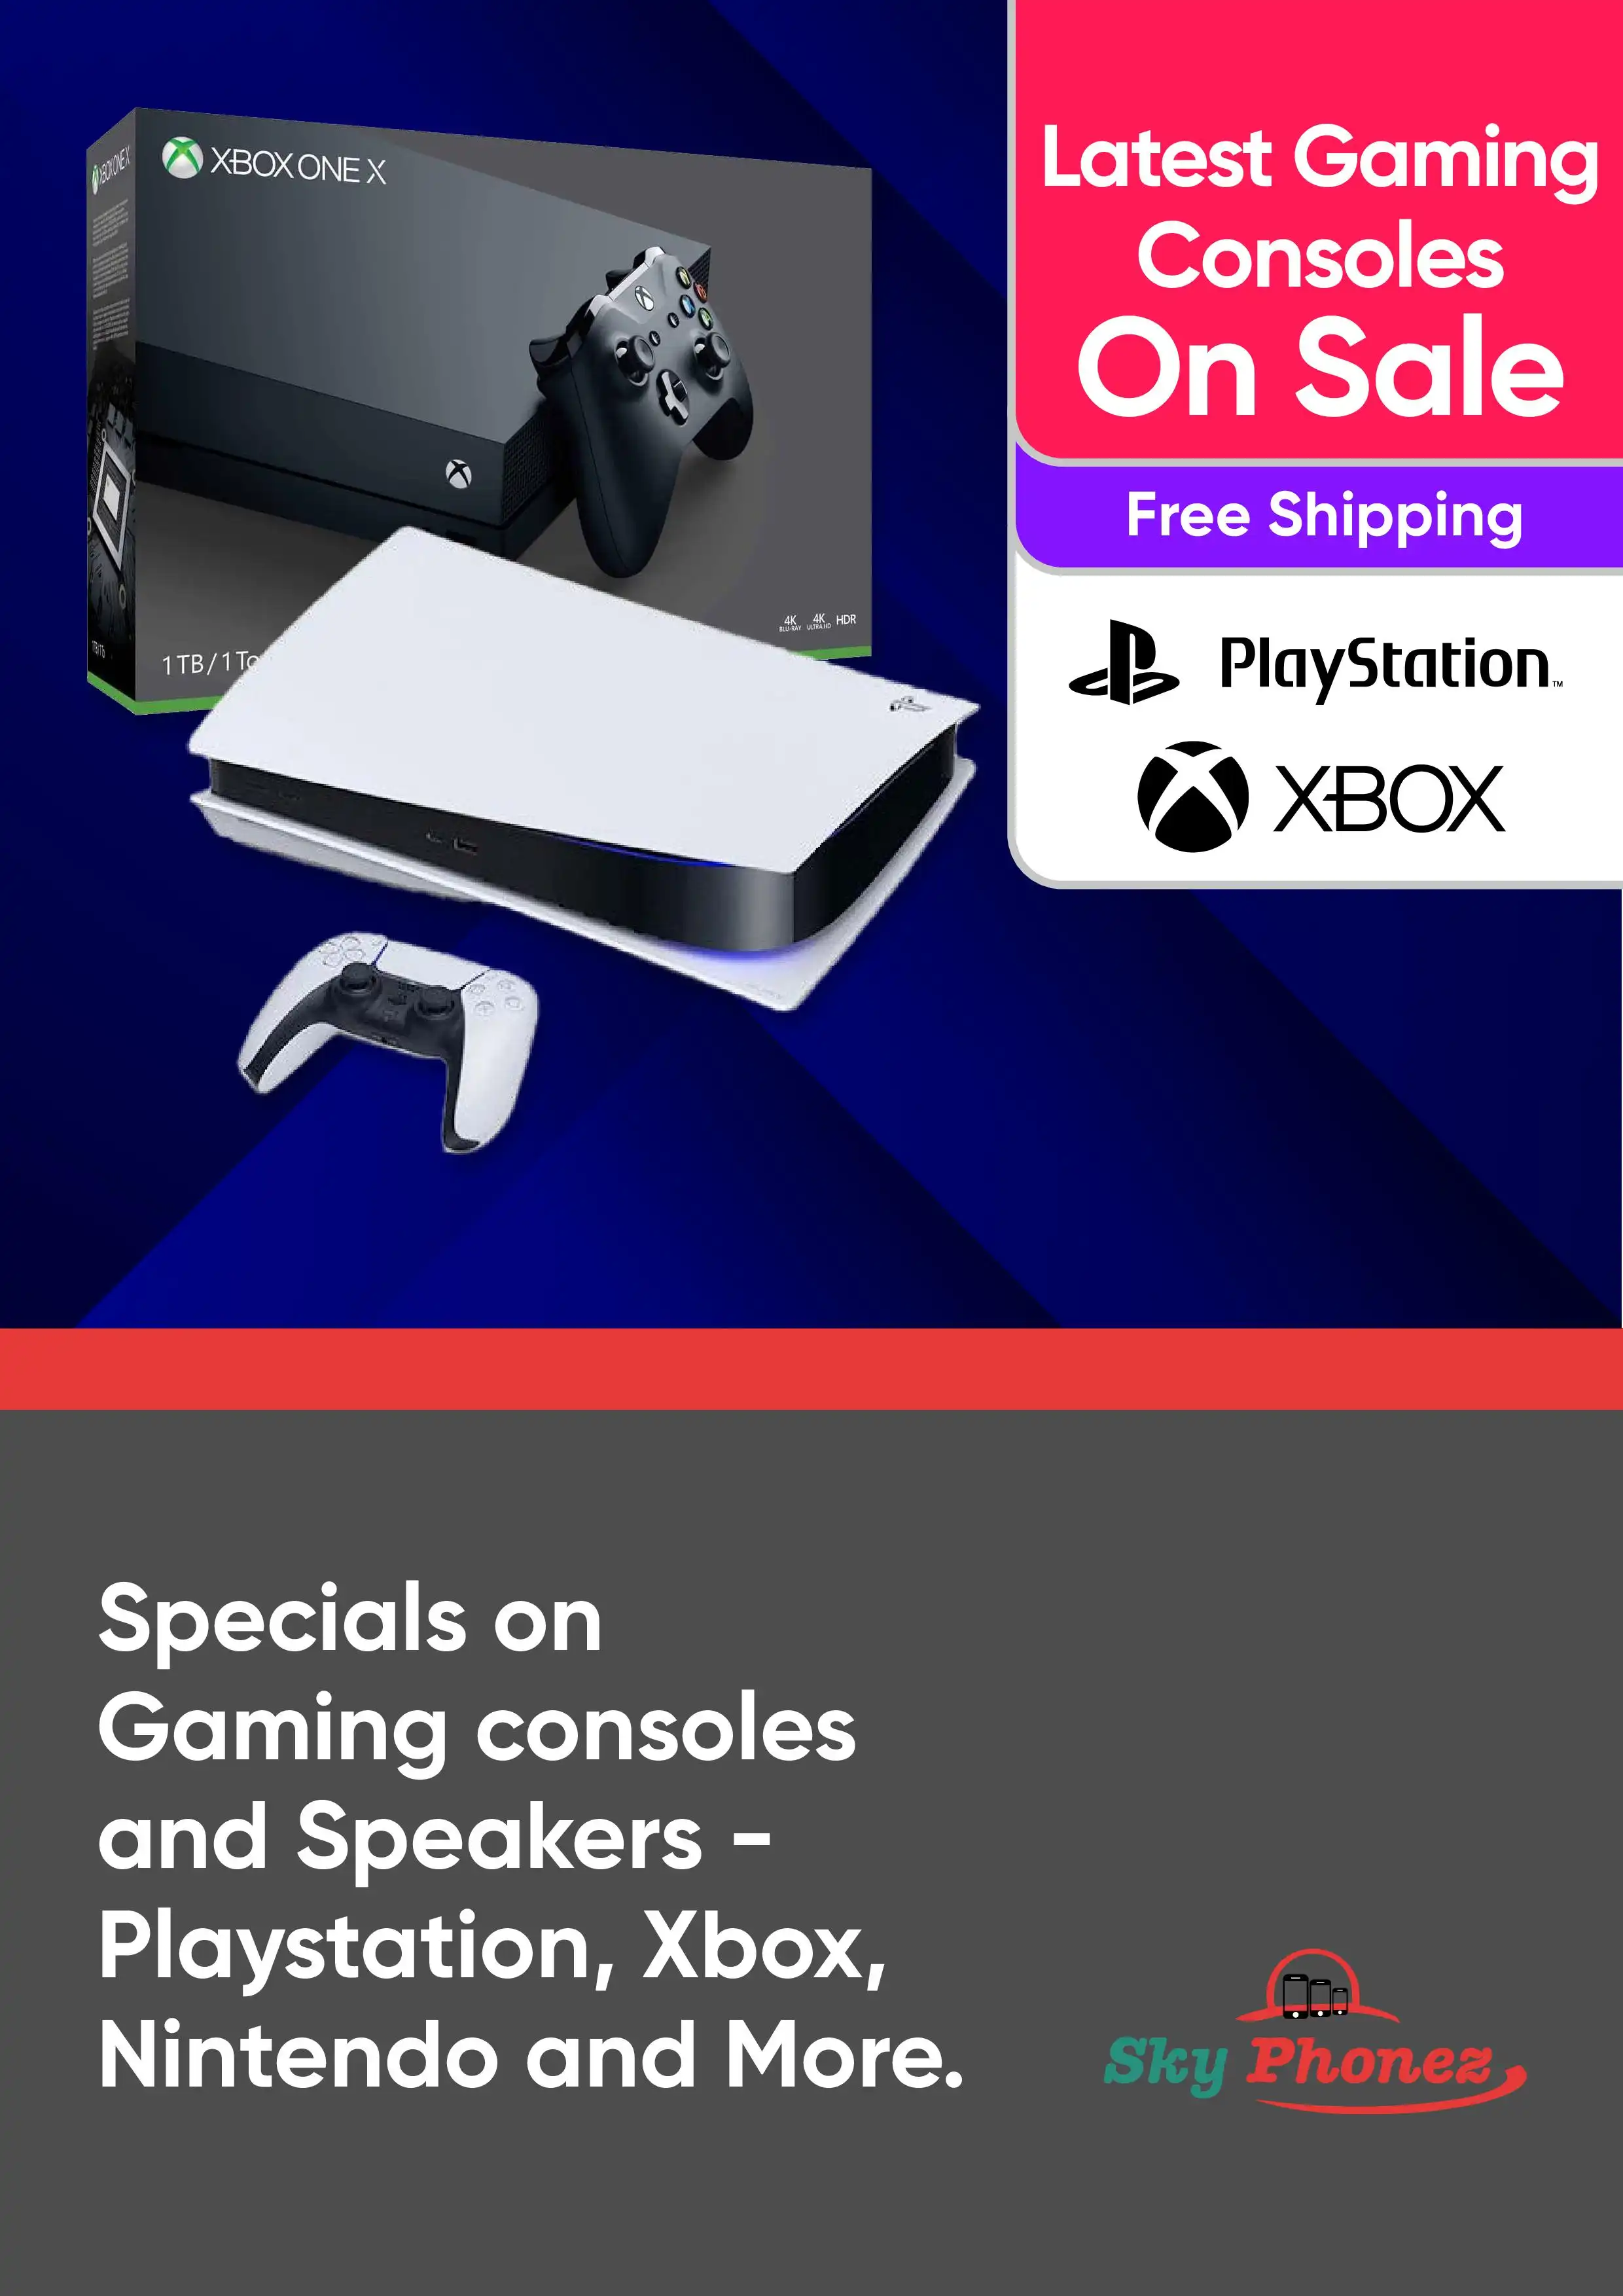 Specials on Gaming Consoles and Speakers - Playstation, Xbox, Nintendo and More